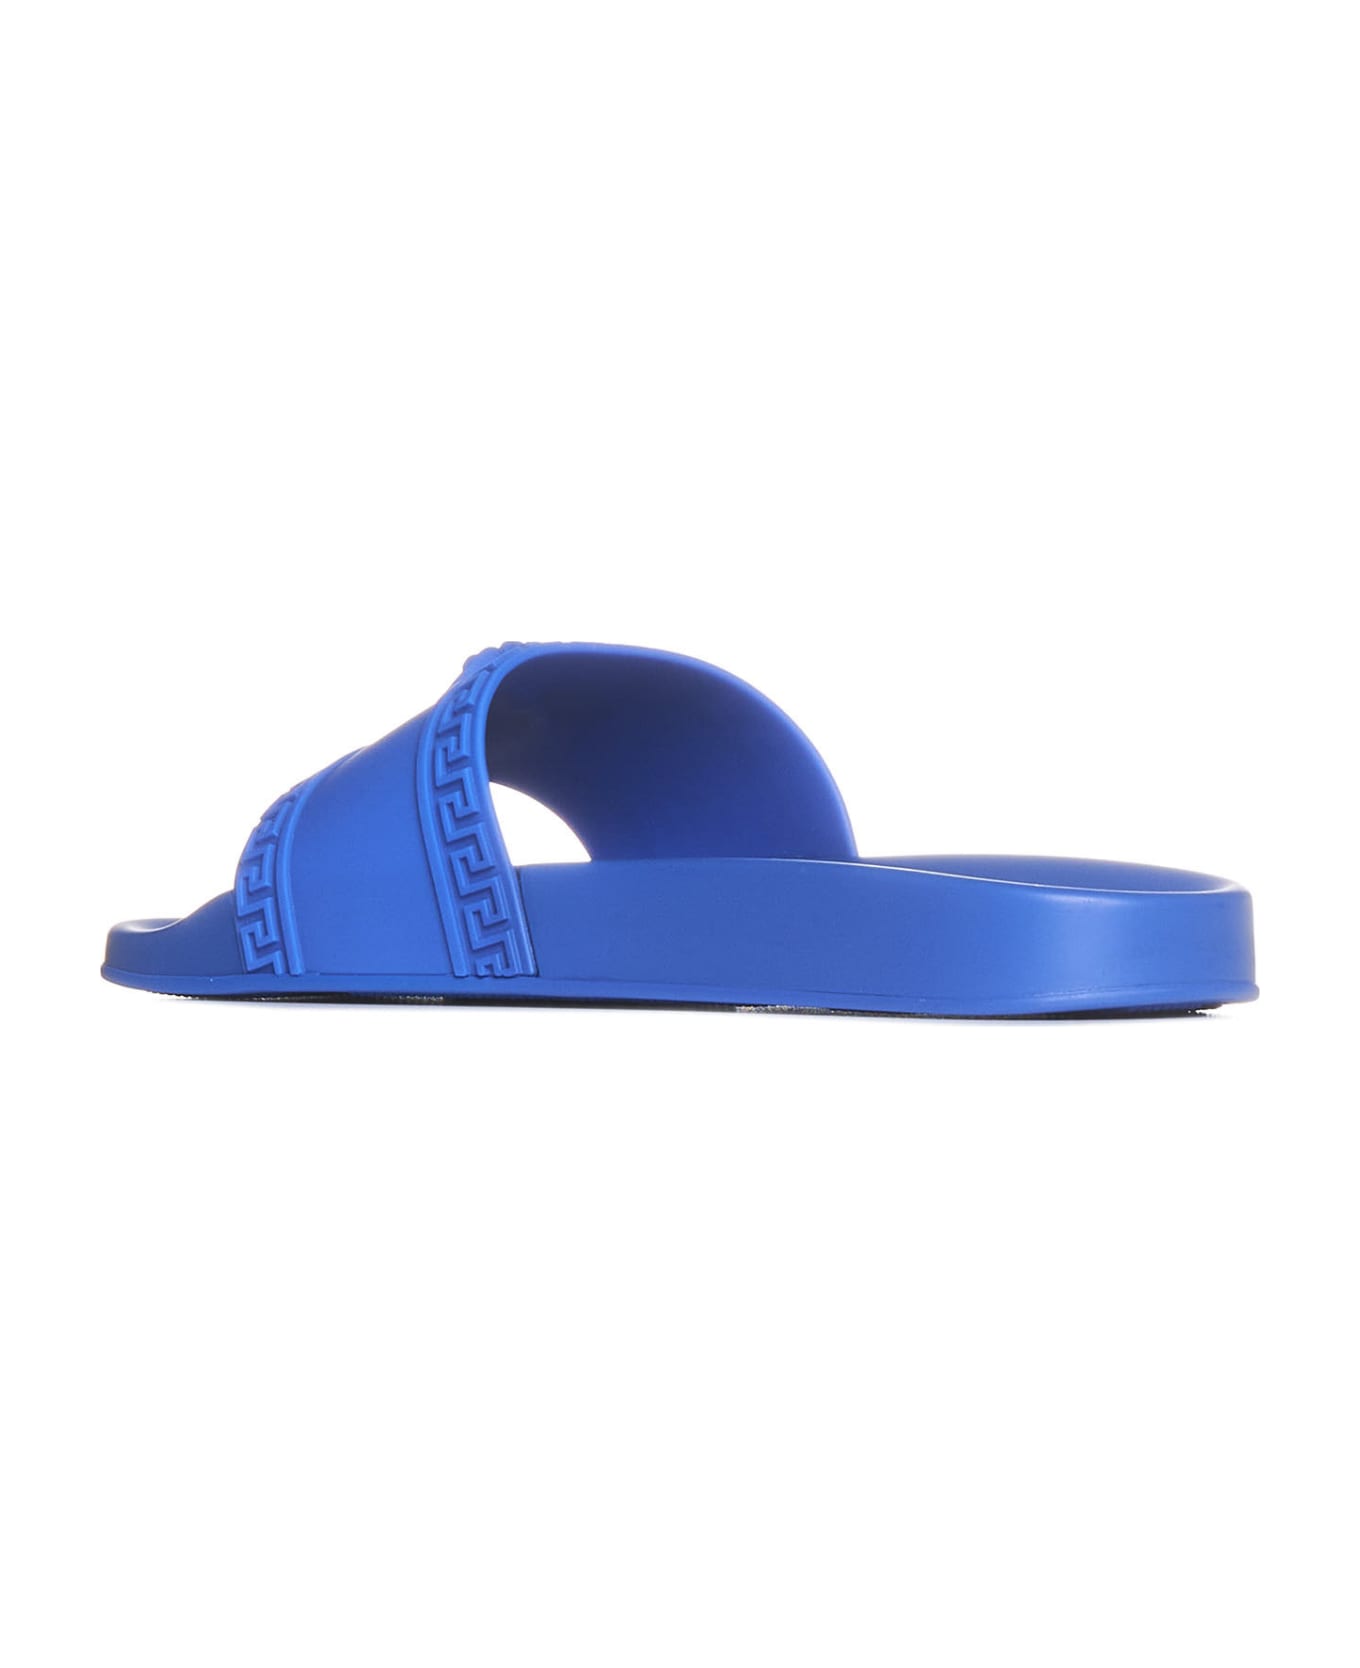 Versace Shoes great - Royal blue